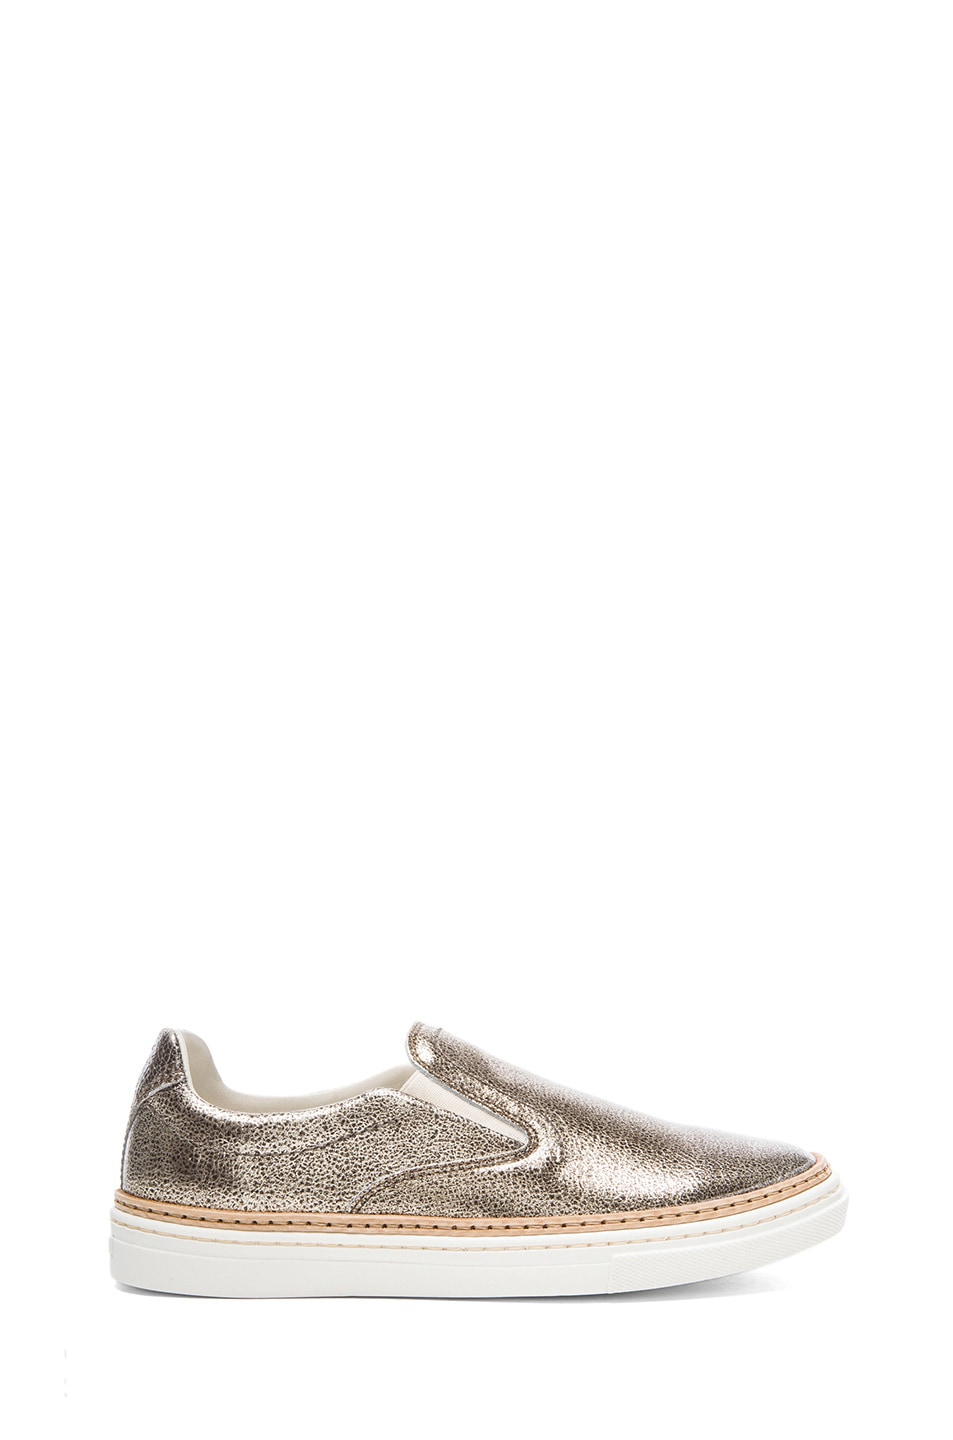 Image 1 of Maison Margiela Crackle Leather Sneakers in Platinum & Brown